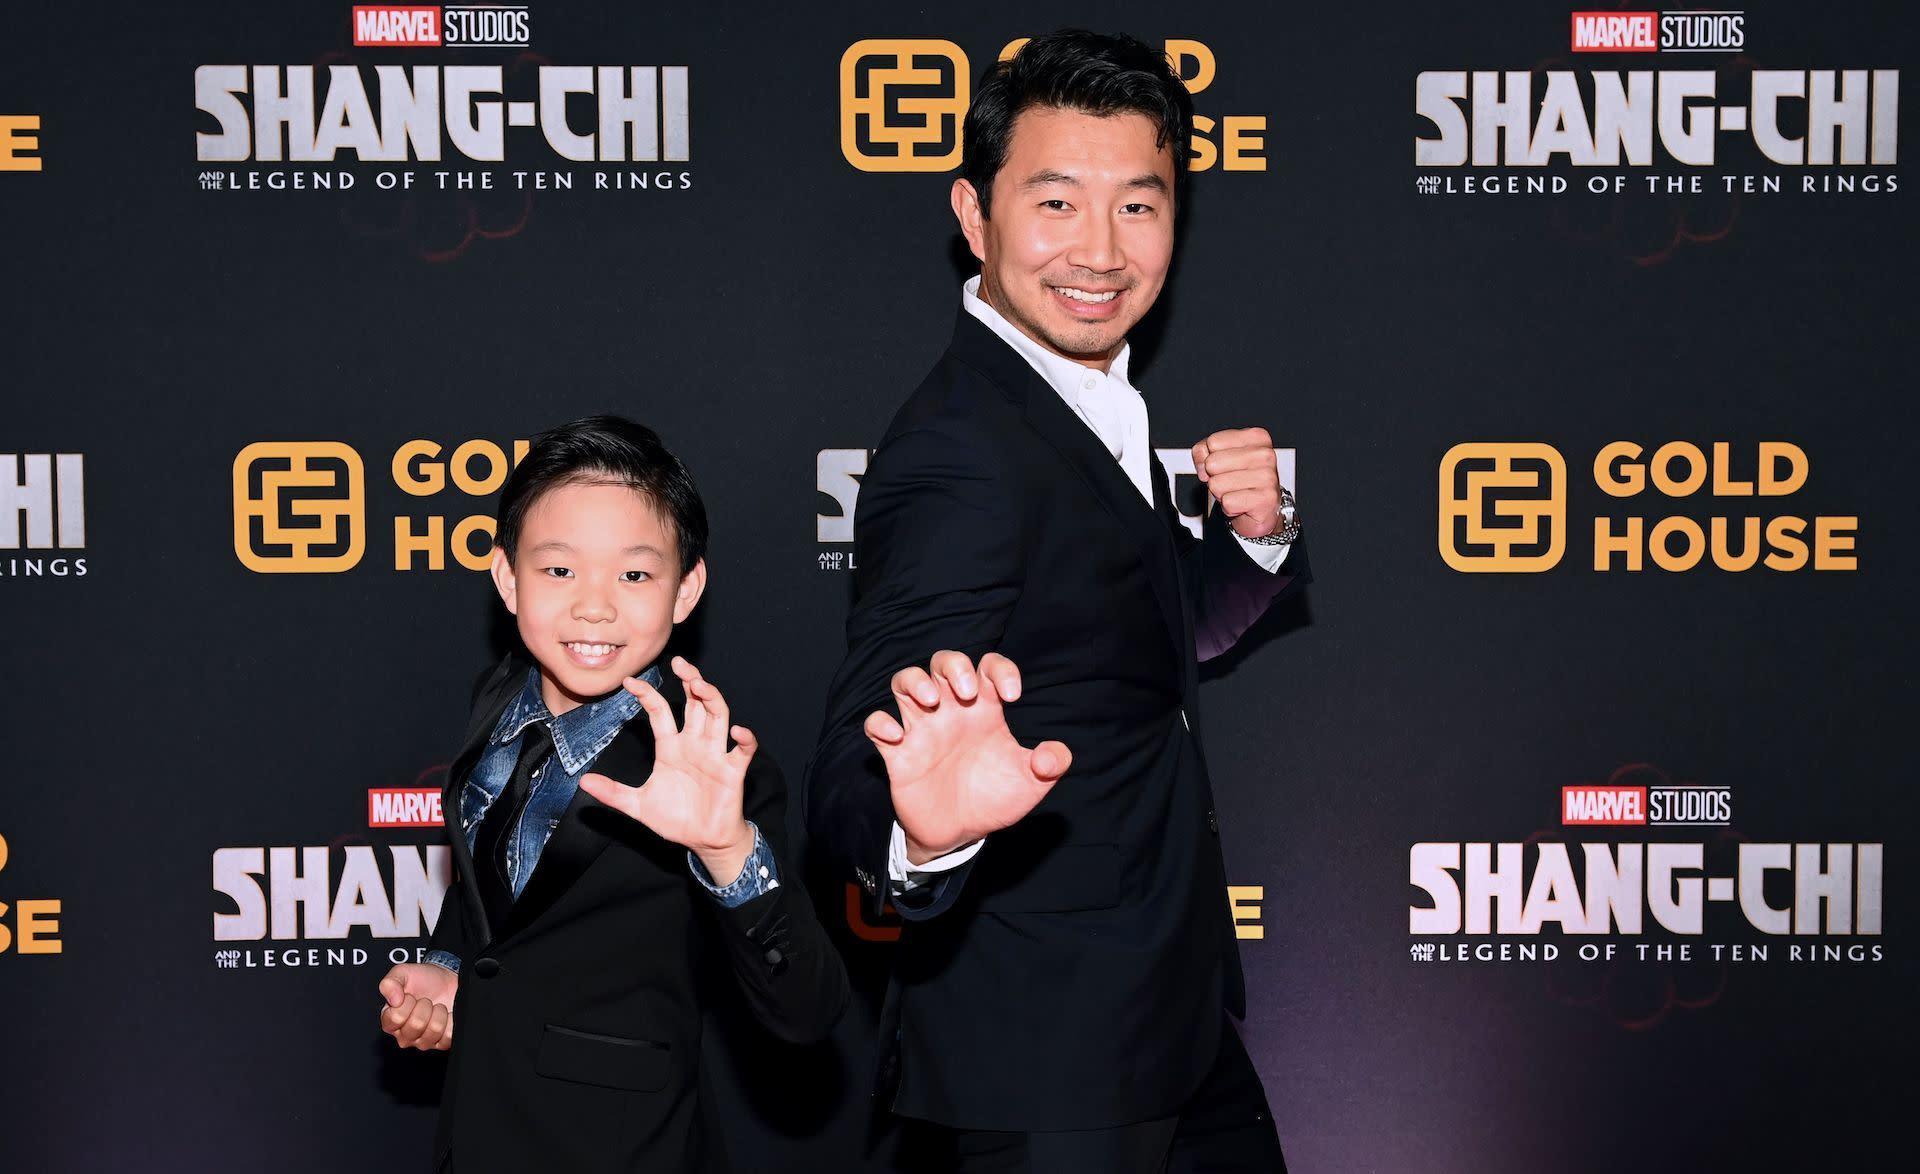 Simu Liu, star of “Shang-Chi,” on the movie's record-breaking weekend